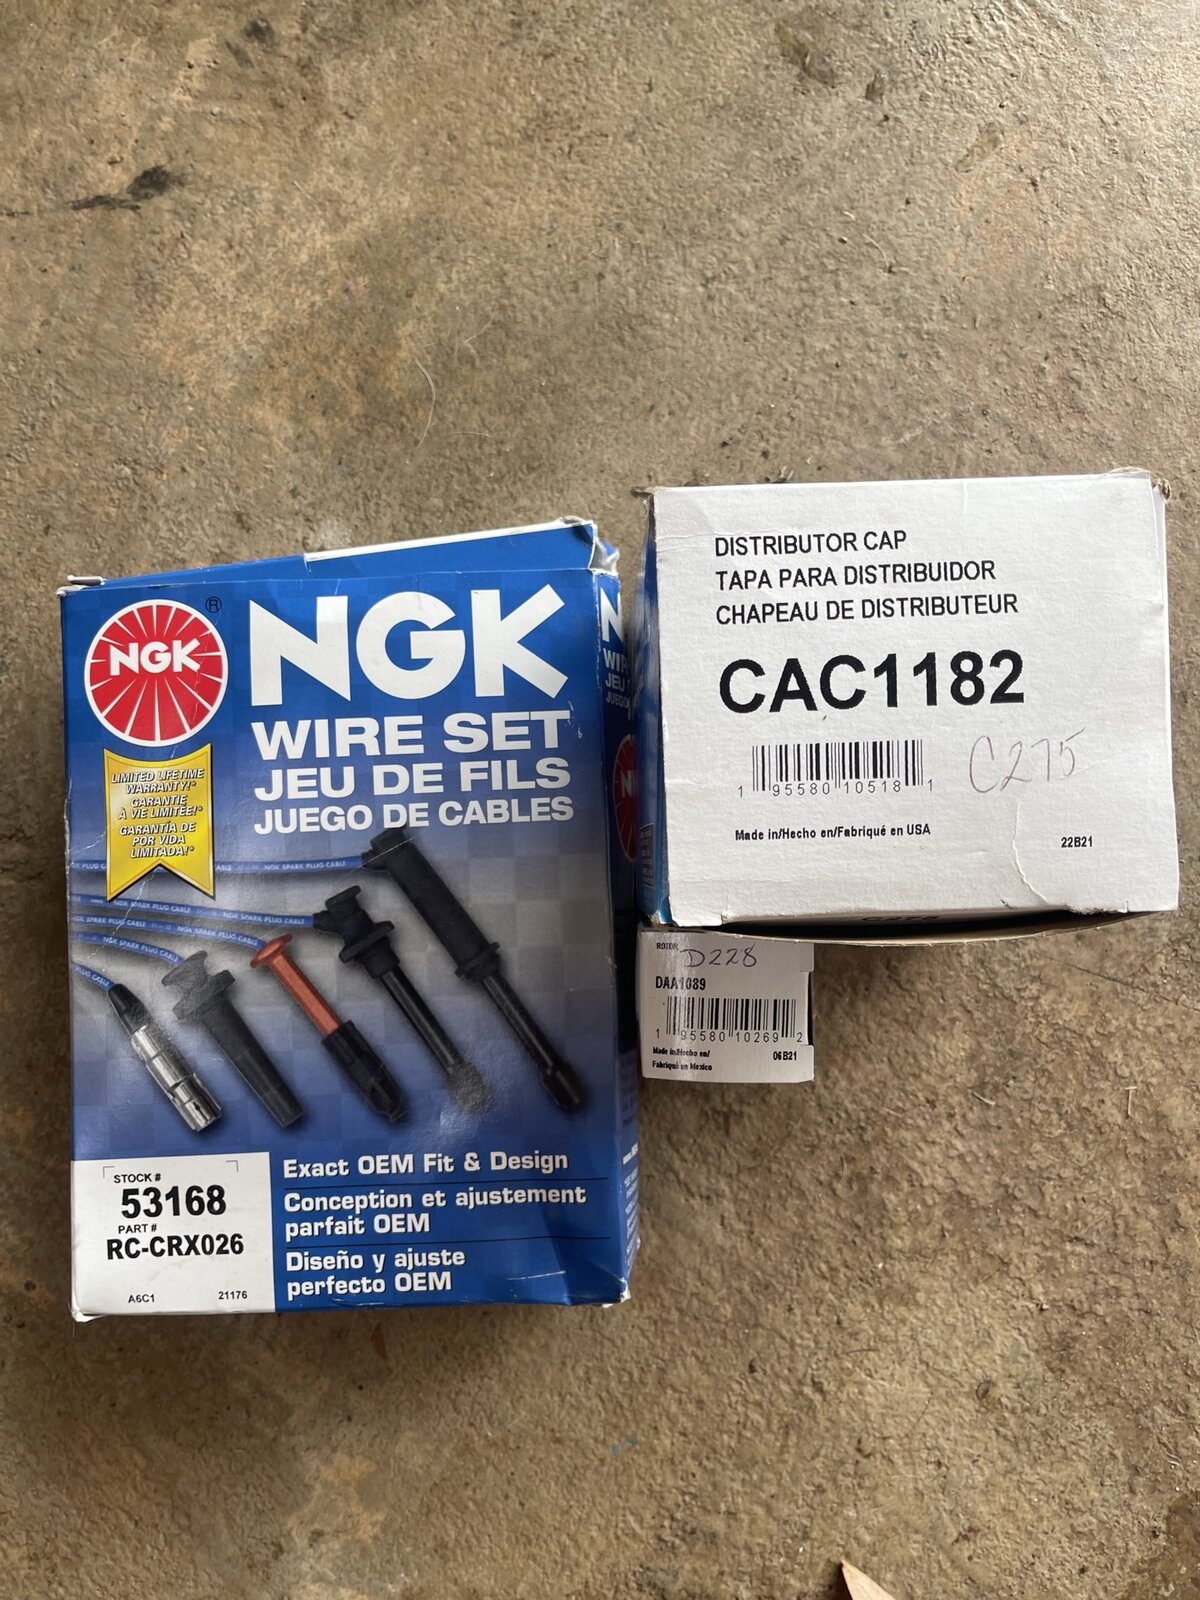 NGK Wires Distributor Cap Button.JPEG